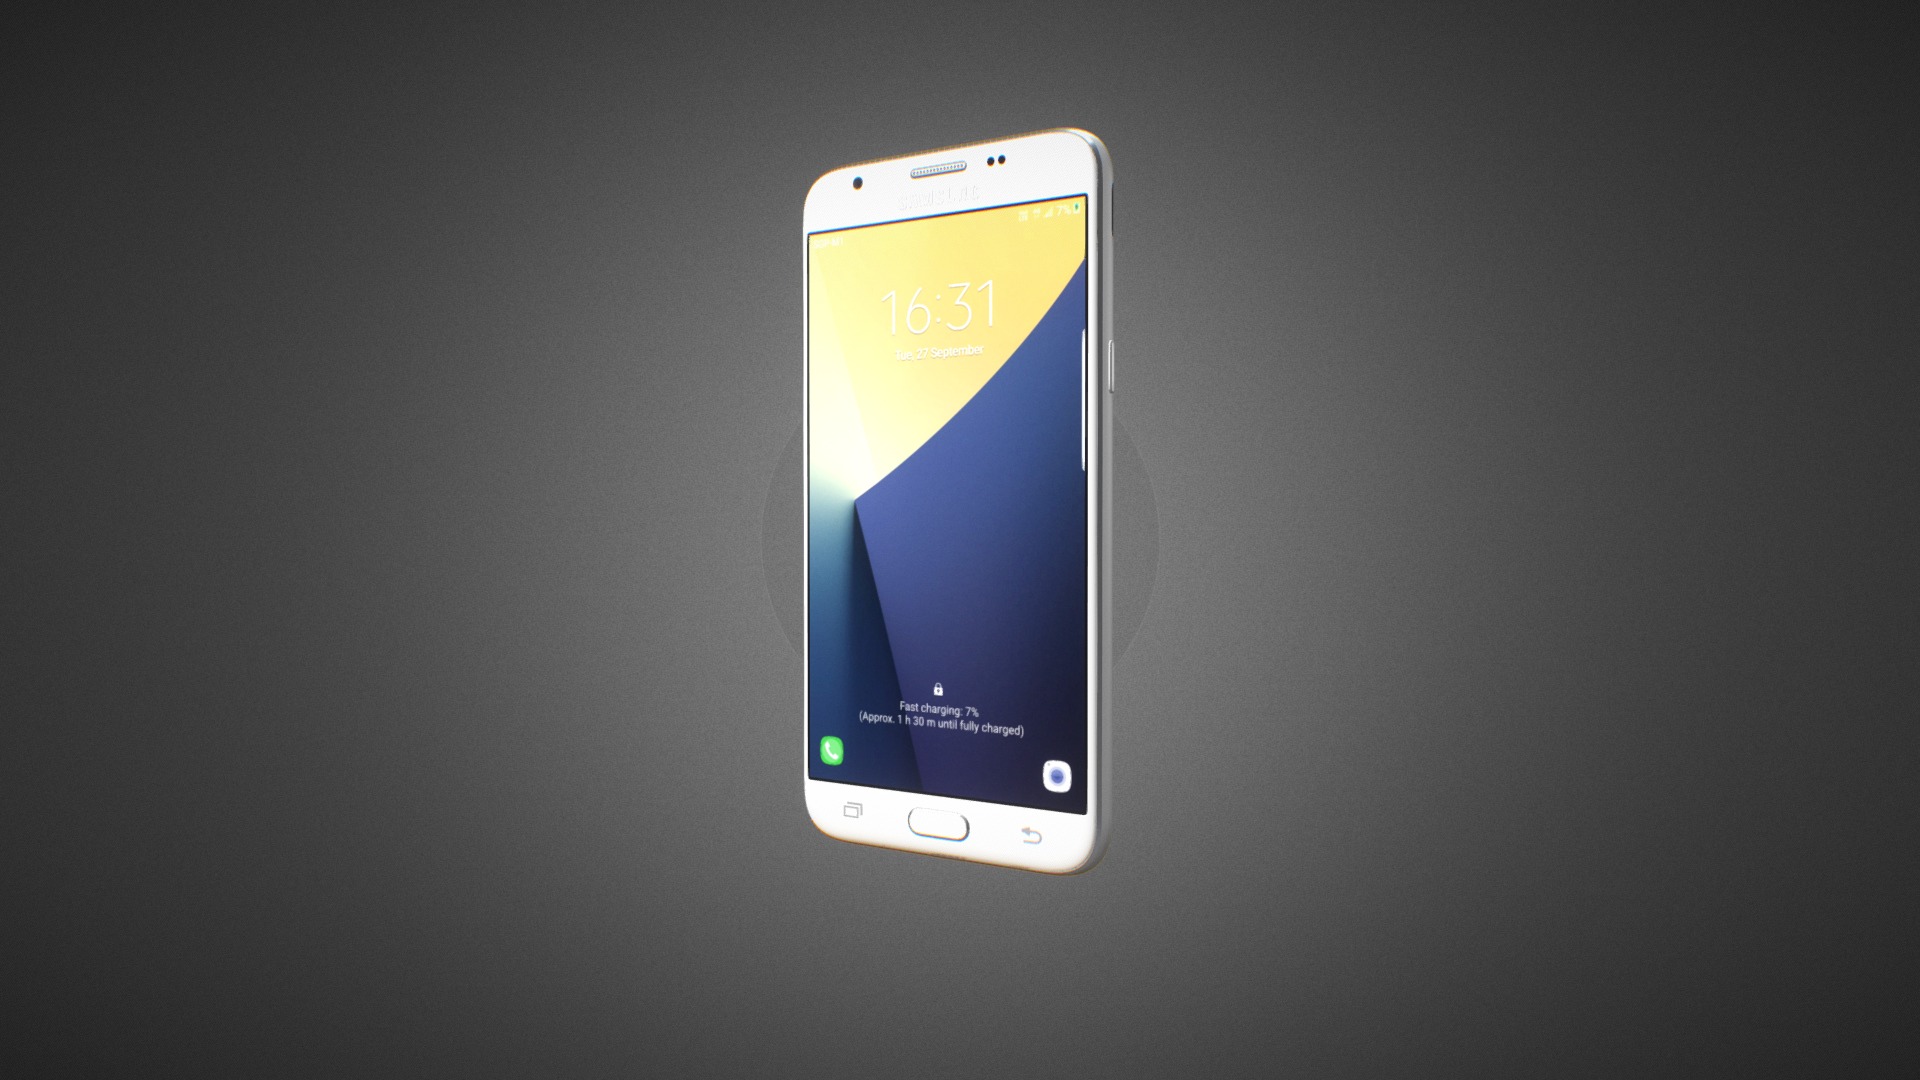 3D model Samsung Galaxy J7 2017 for Element 3D - This is a 3D model of the Samsung Galaxy J7 2017 for Element 3D. The 3D model is about a cell phone on a table.